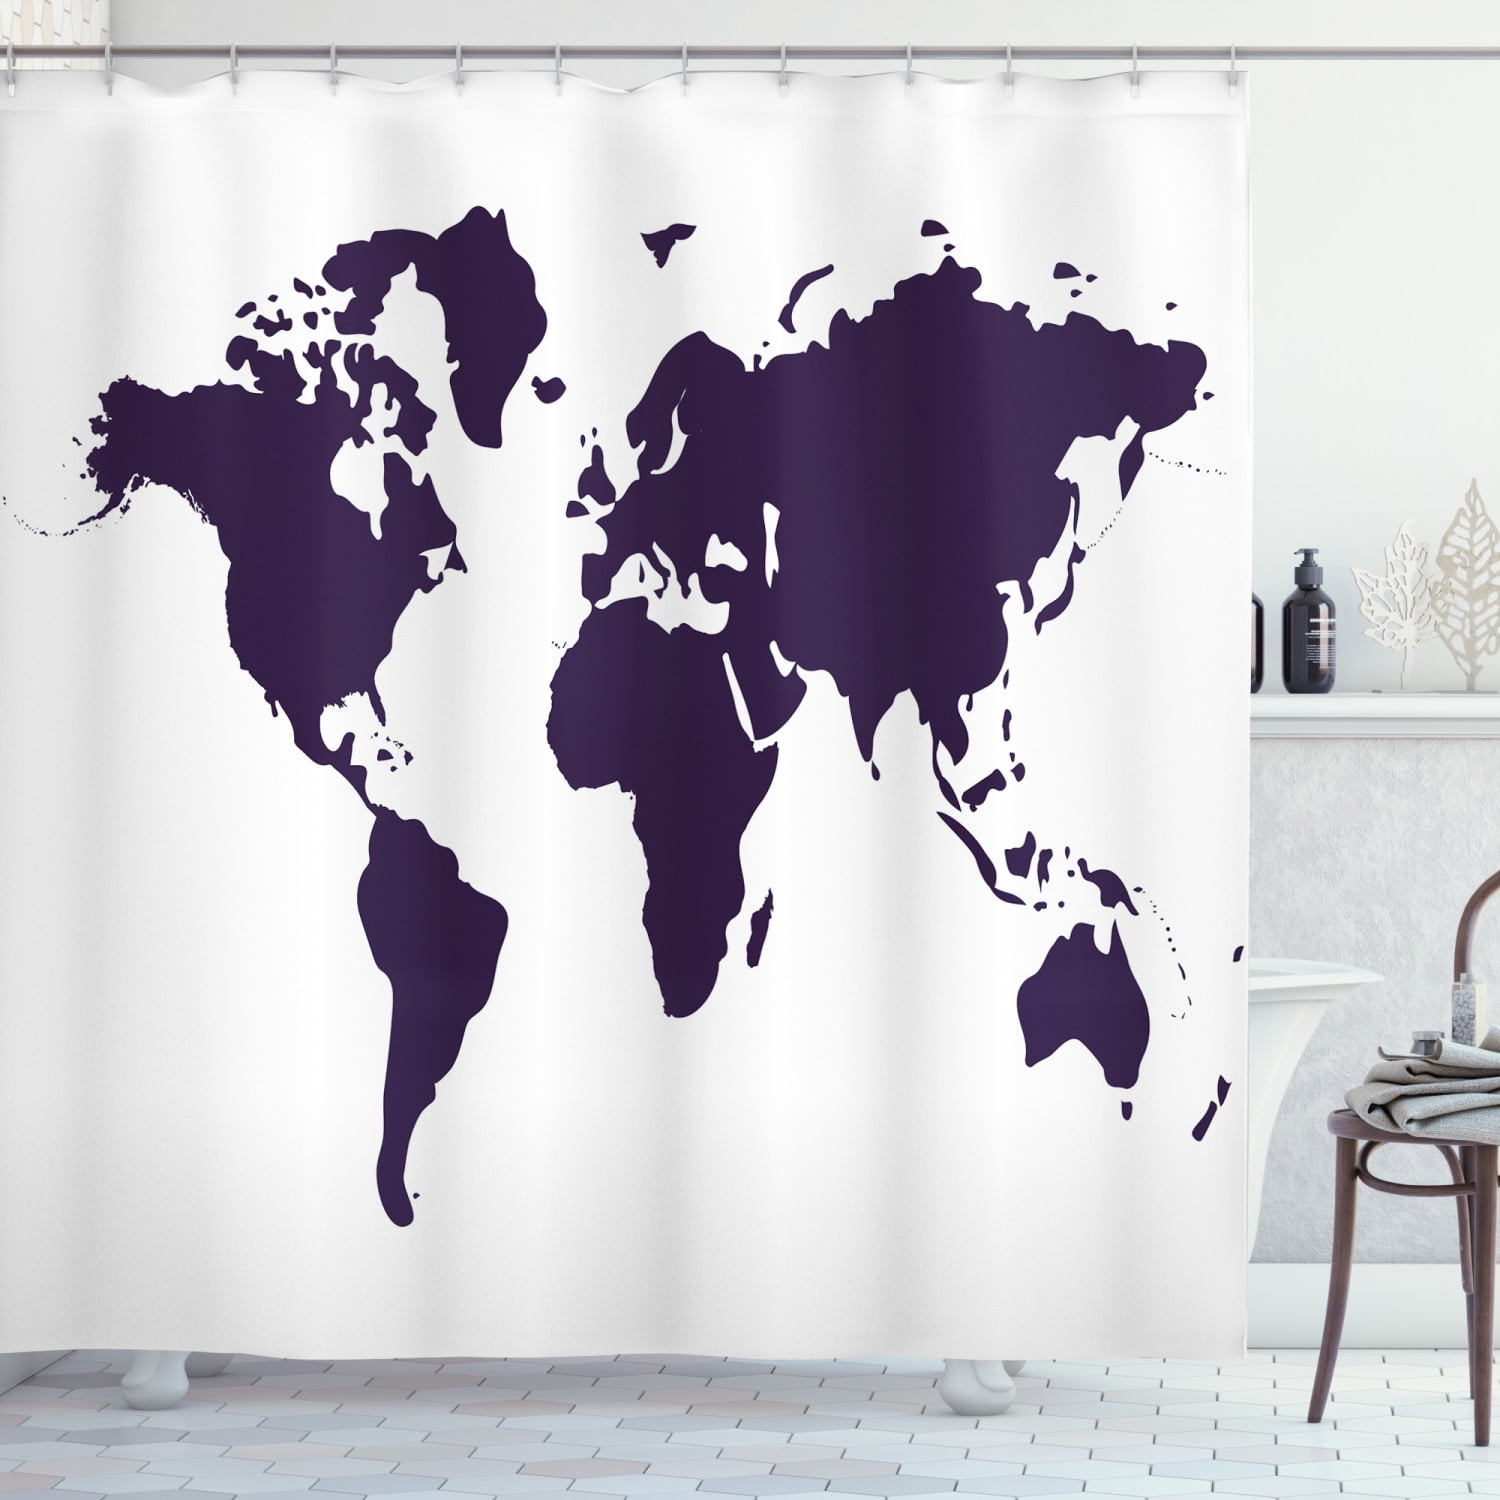 Map Shower Curtain, Indigo Colored Graphic Map of the World Display International Global Theme, Fabric Bathroom Set with Hooks, 69W X 75L Inches Long, Indigo White, by Ambesonne - Walmart.com